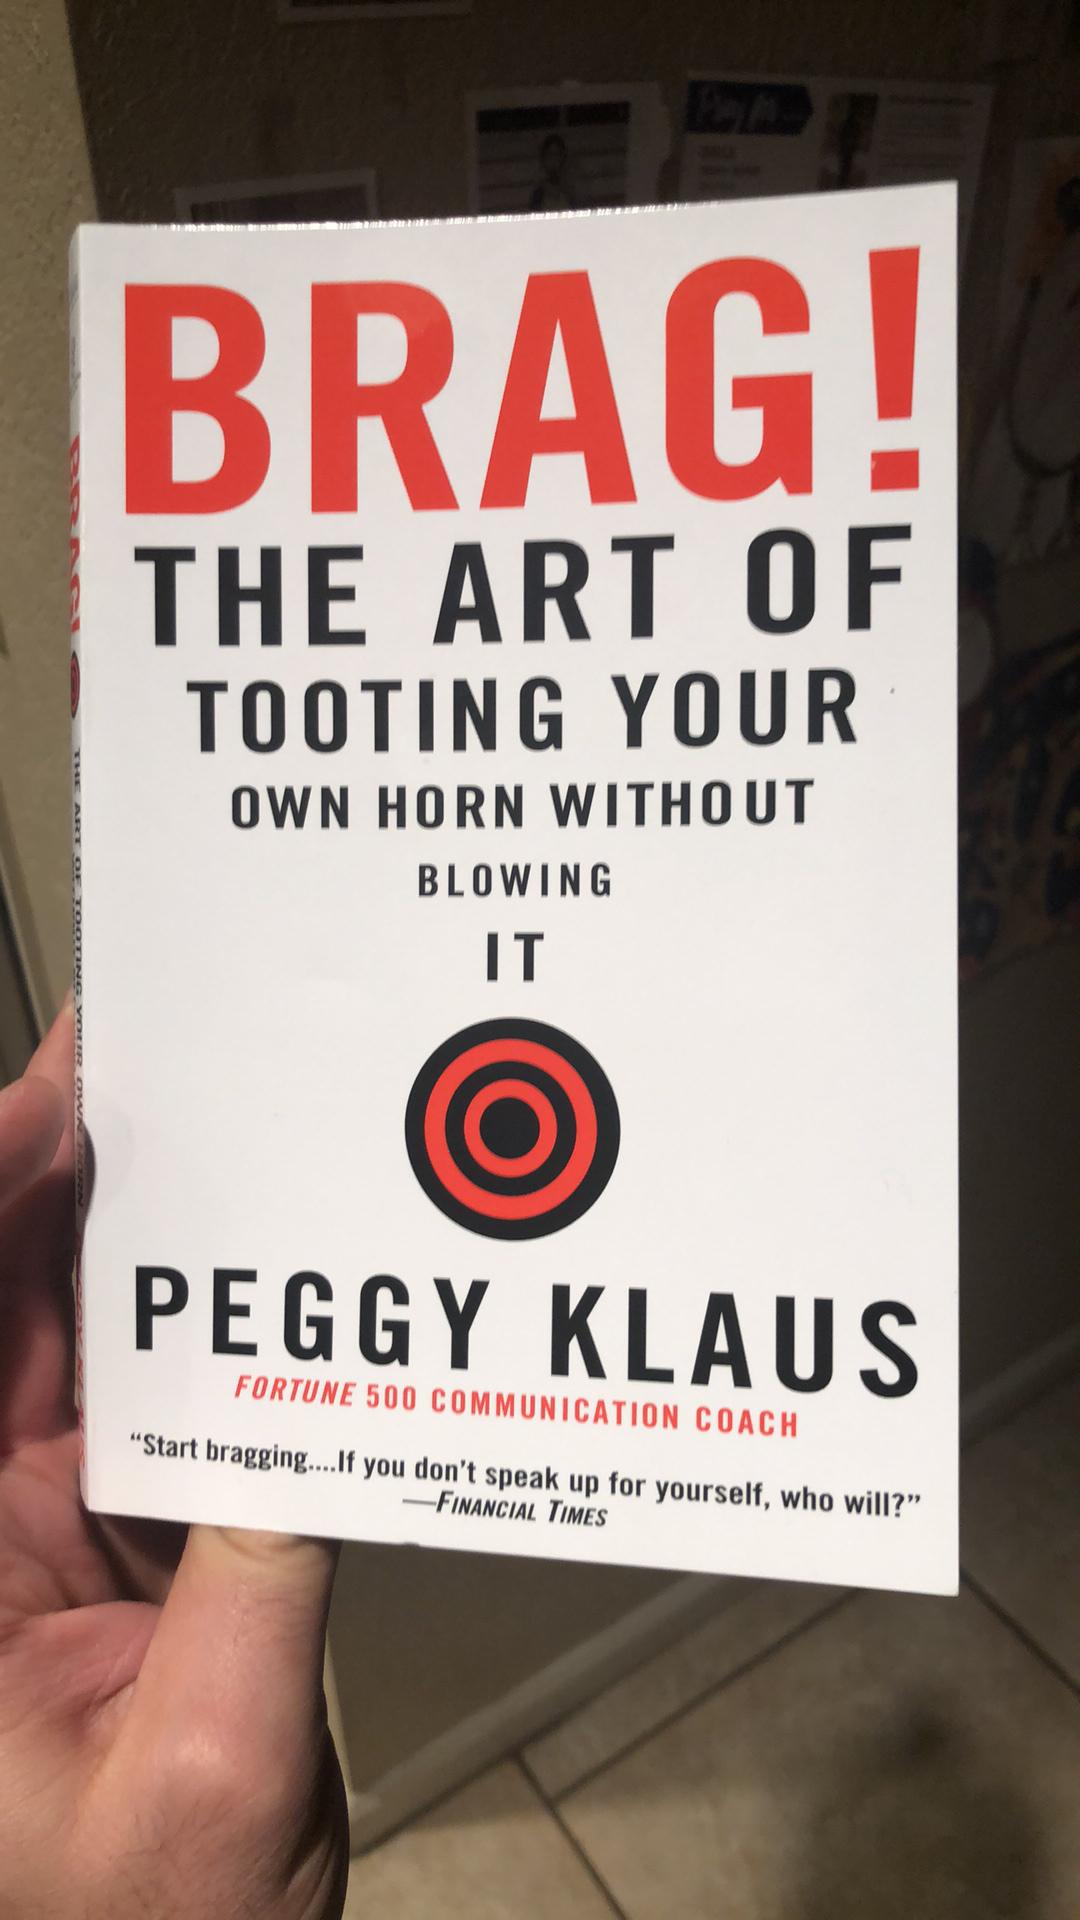 The Brag book by Peggy Klaus